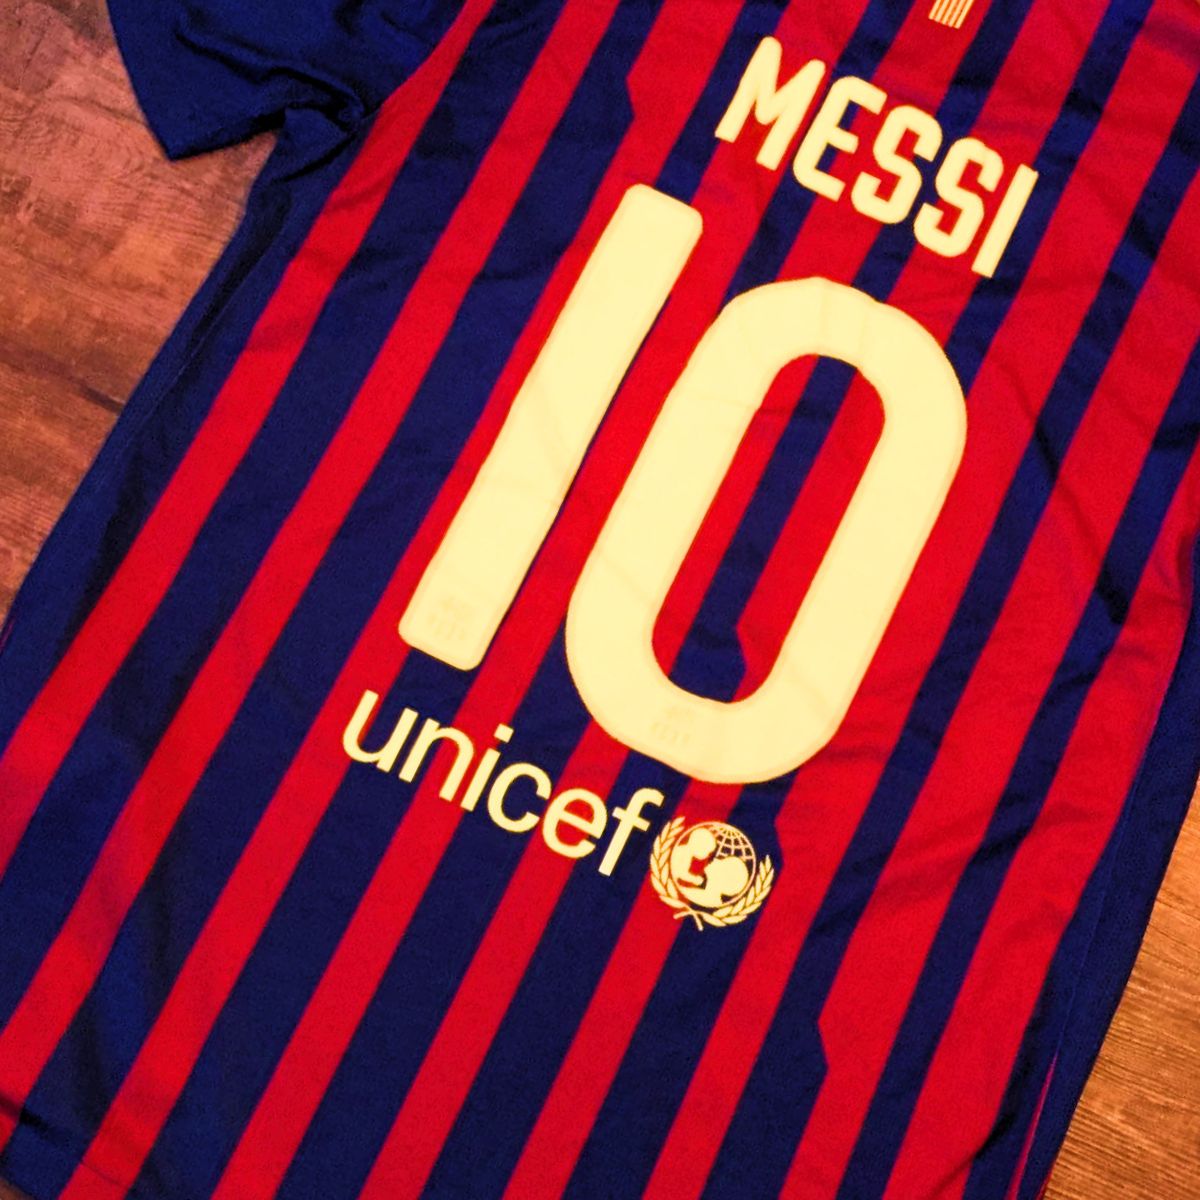 Features of Messi Barcelona Jerseys